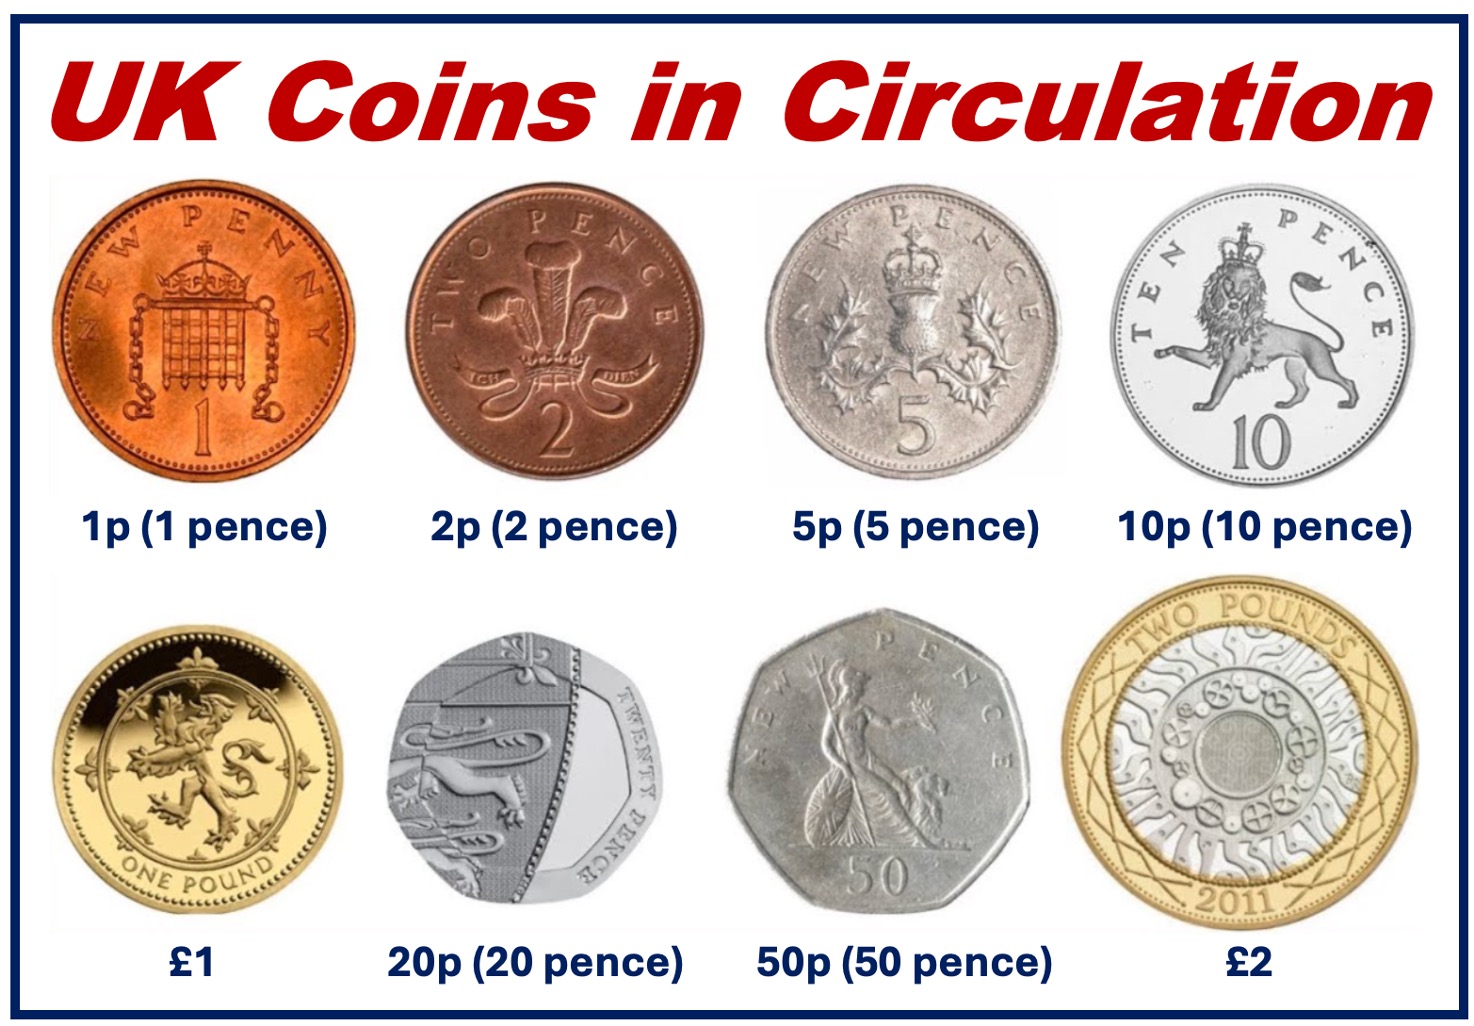 UK Coins in Circulation